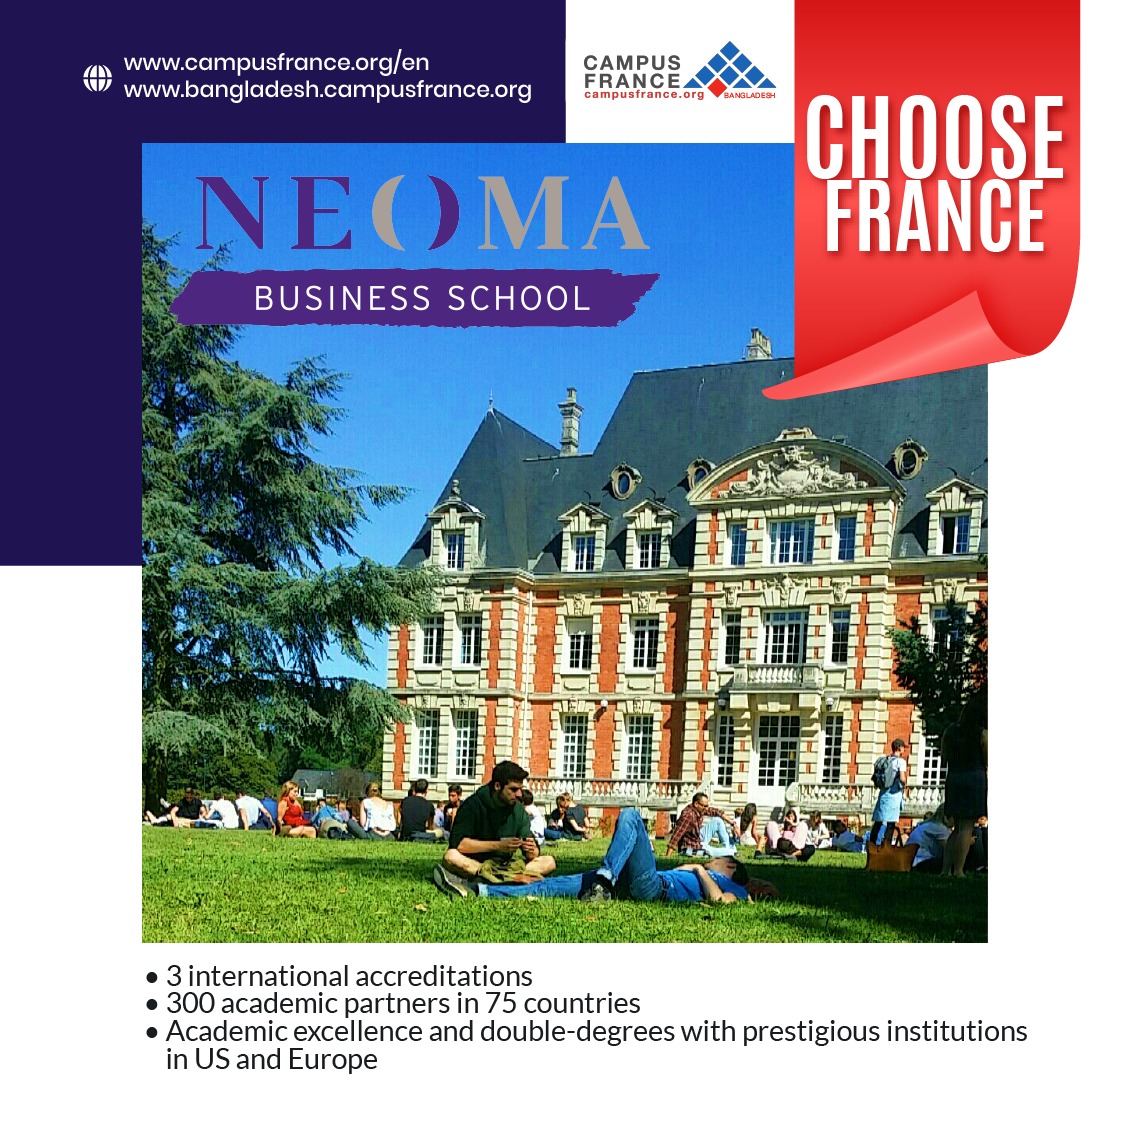 NEOMA BUSINESS SCHOOL | Campus France